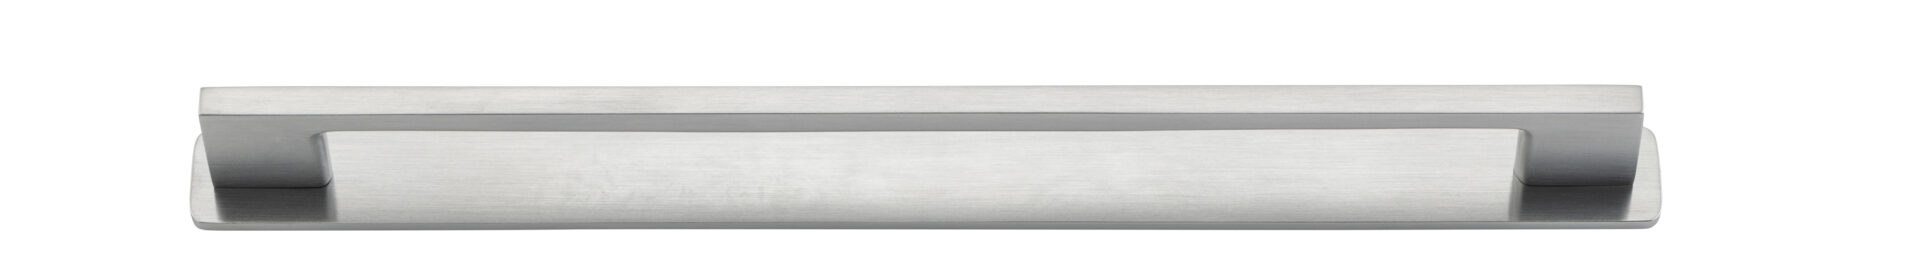 0537B - Cali Cabinet Pull with Backplate - CTC 256mm - Brushed Chrome